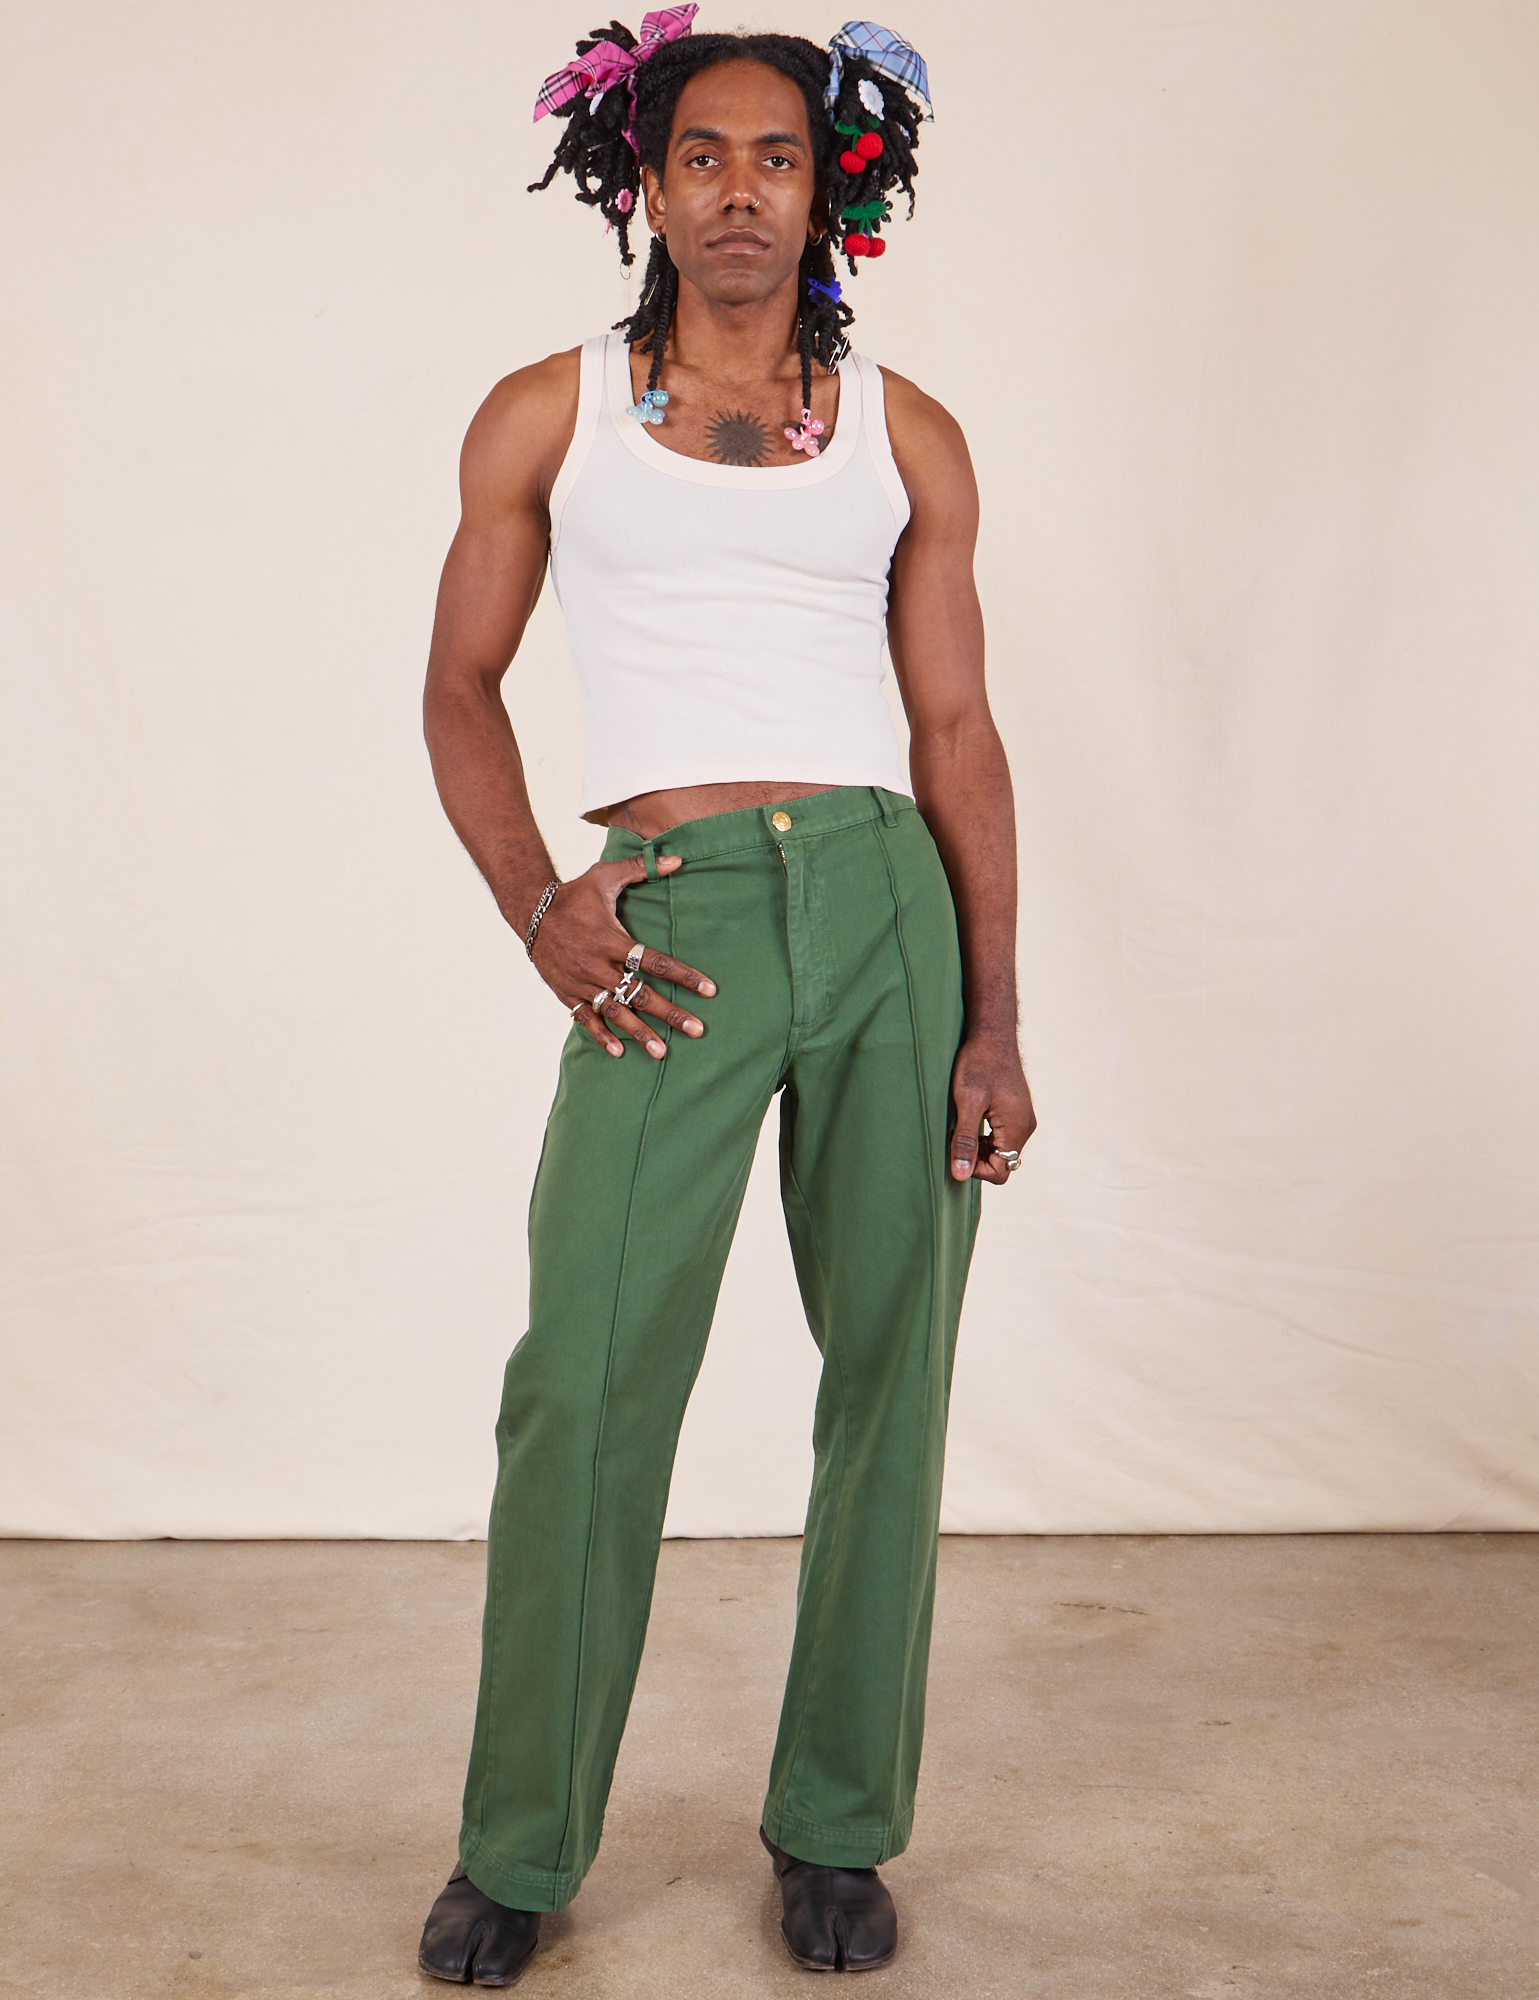 Jerrod is 6&#39;3&quot; and wearing M Long Western Pants in Dark Emerald Green paired with vintage off-white Cropped Tank Top